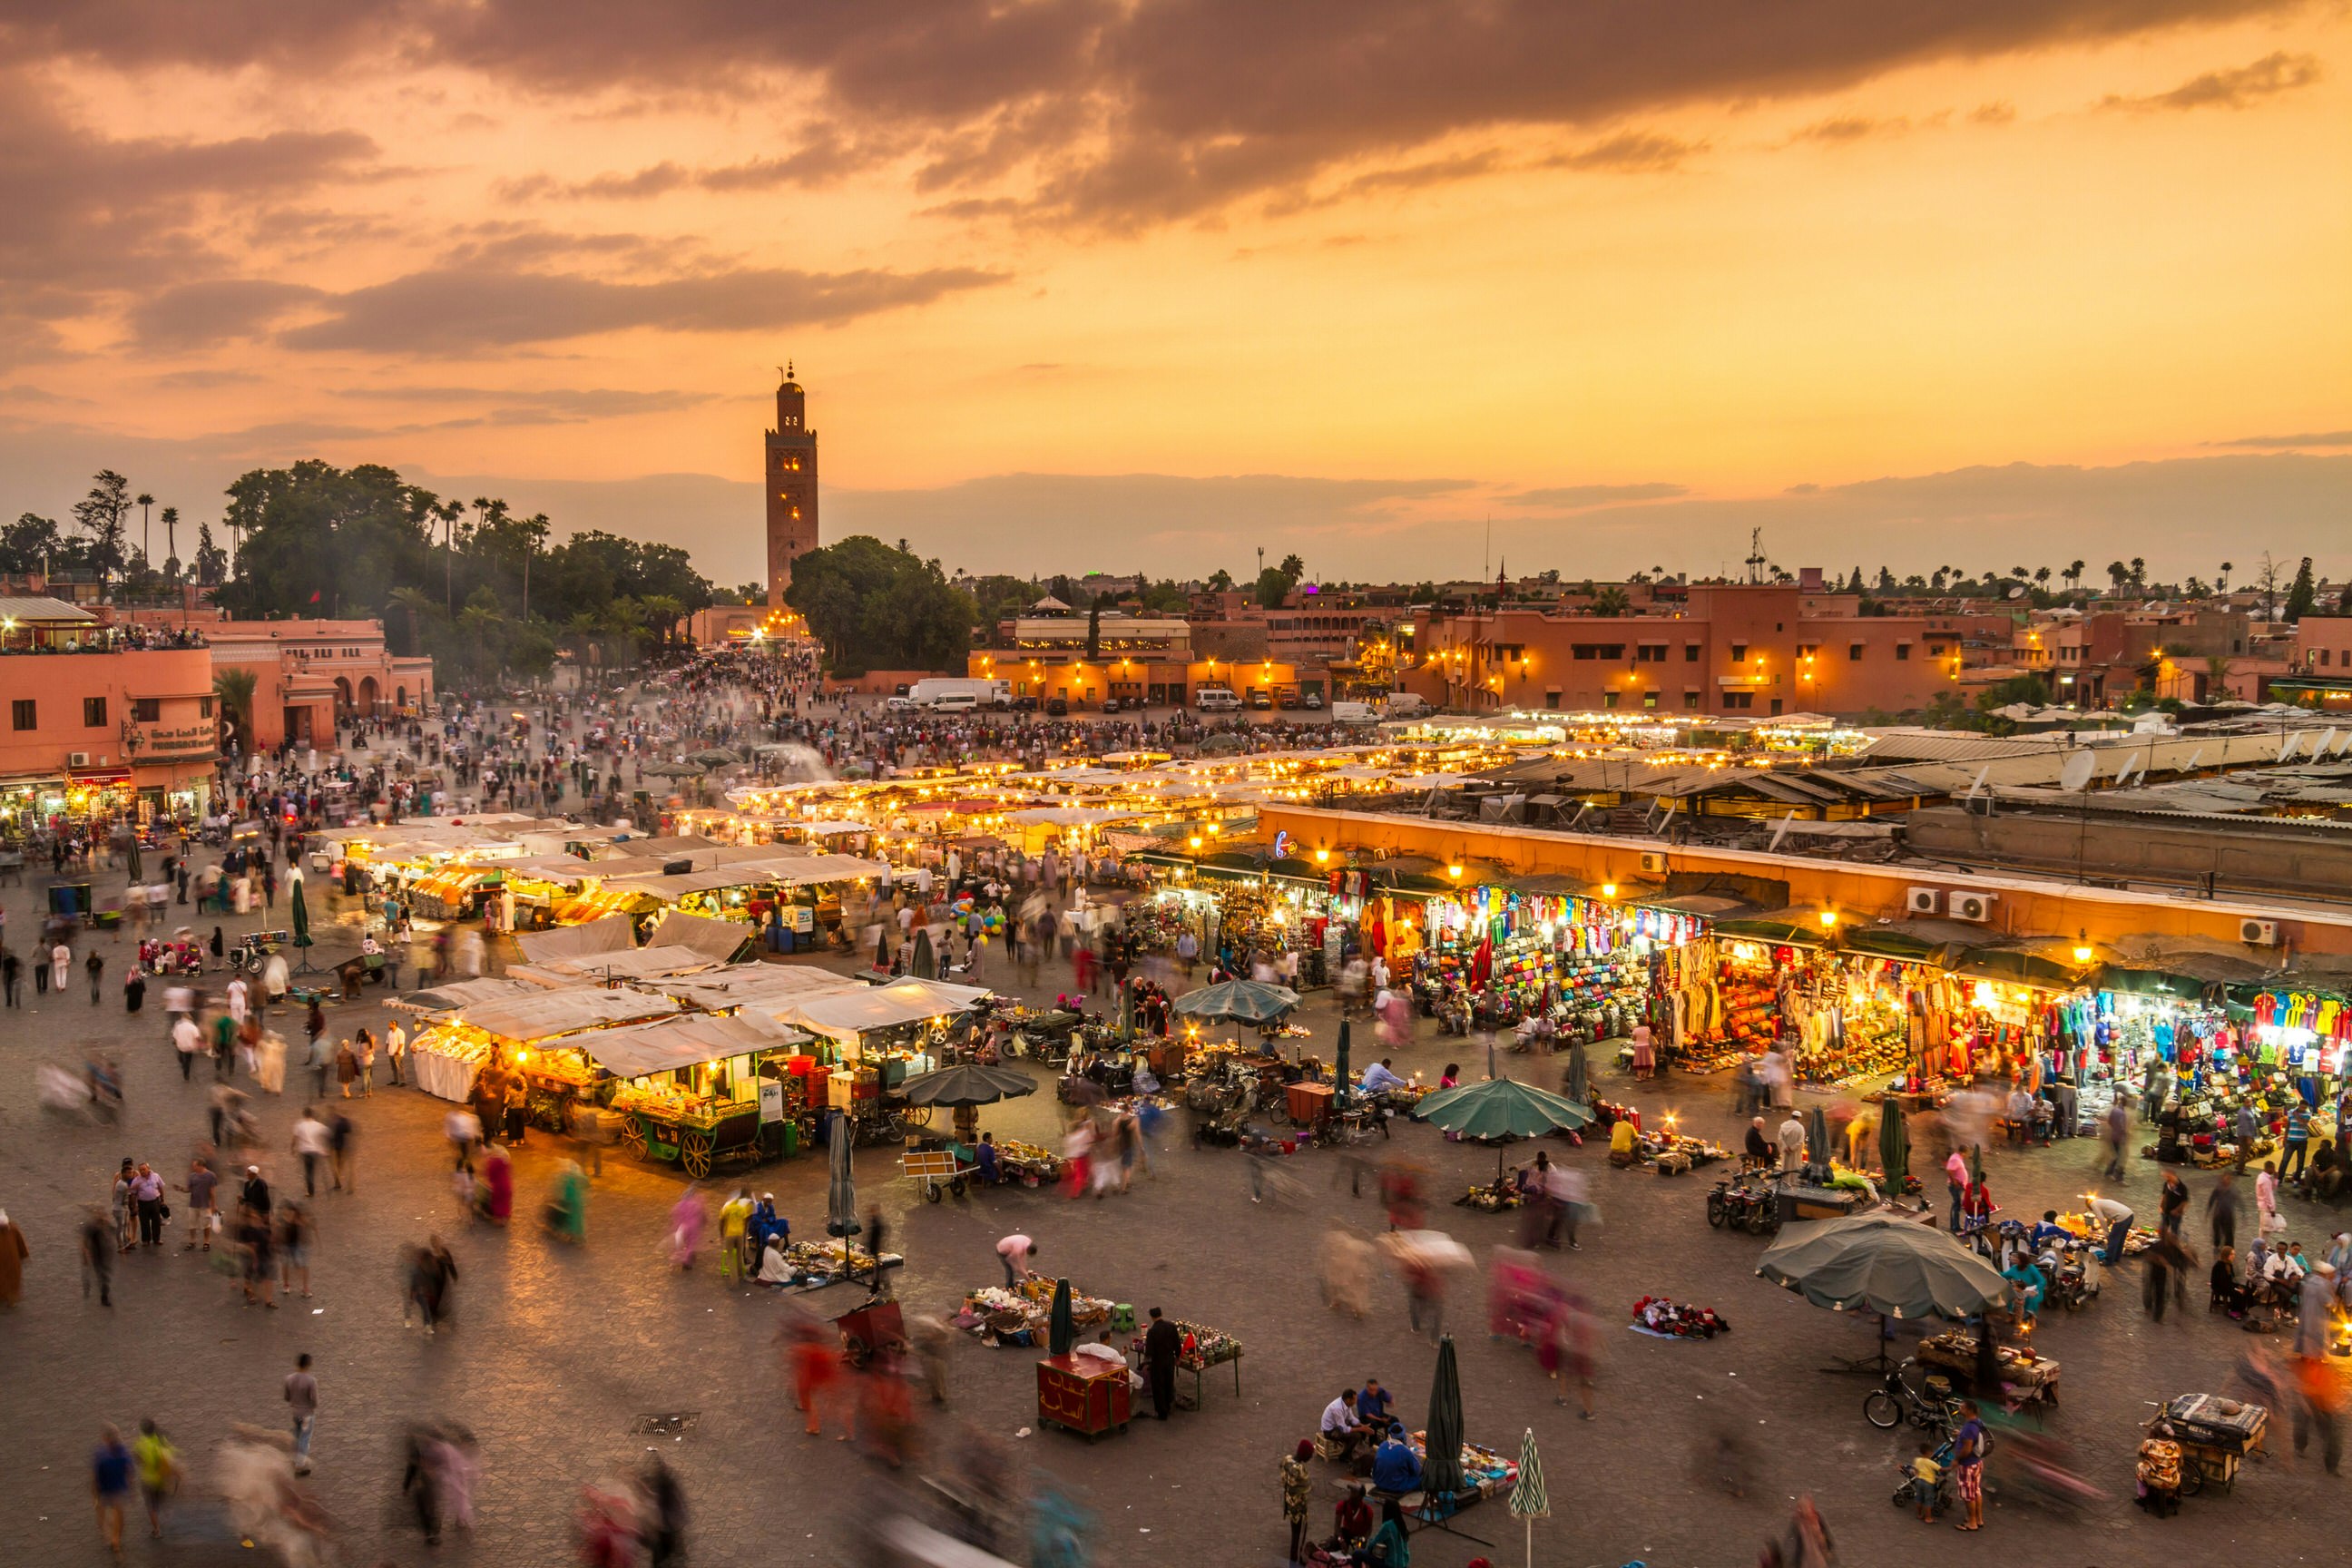 Aerial of a crowd at Djemaa El Fna square during the early evening in Marrakesh's Medina quarter; moving people are blurred between the umbrella-covered food stands. The mosque's minaret stands tall against the orange sky in the background.